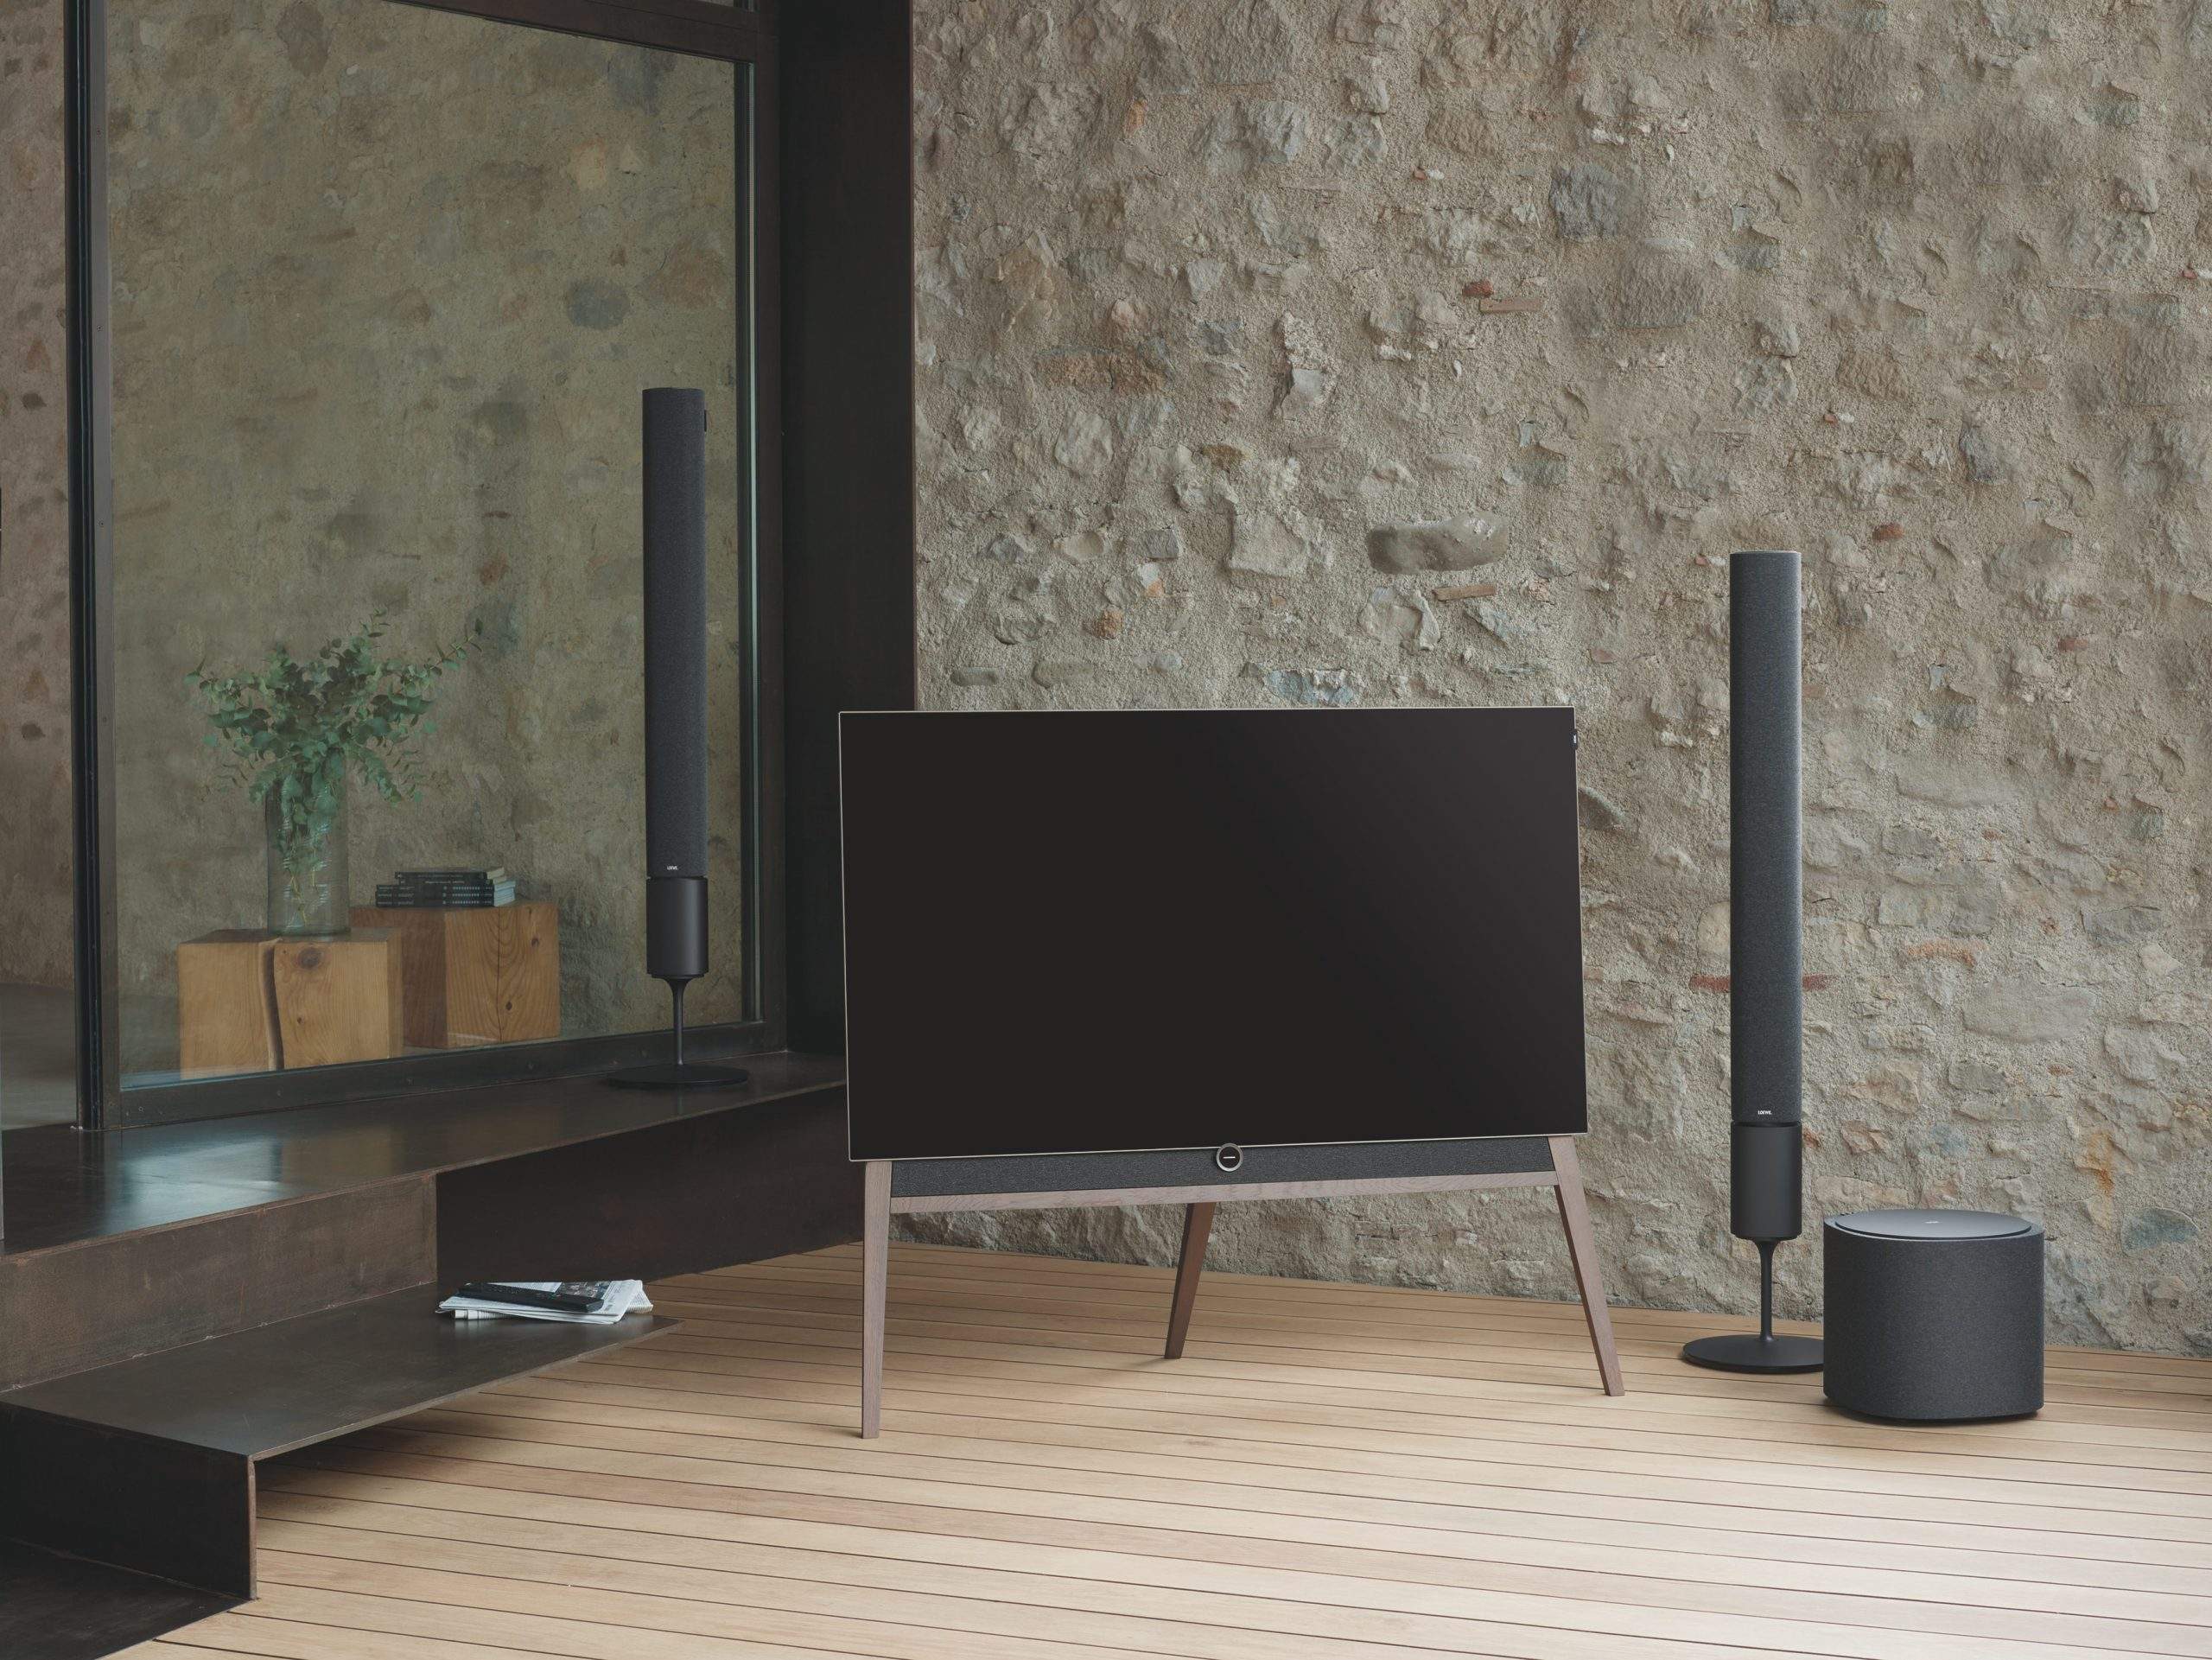 How To Connect Speakers To TV Without Receiver In 2021